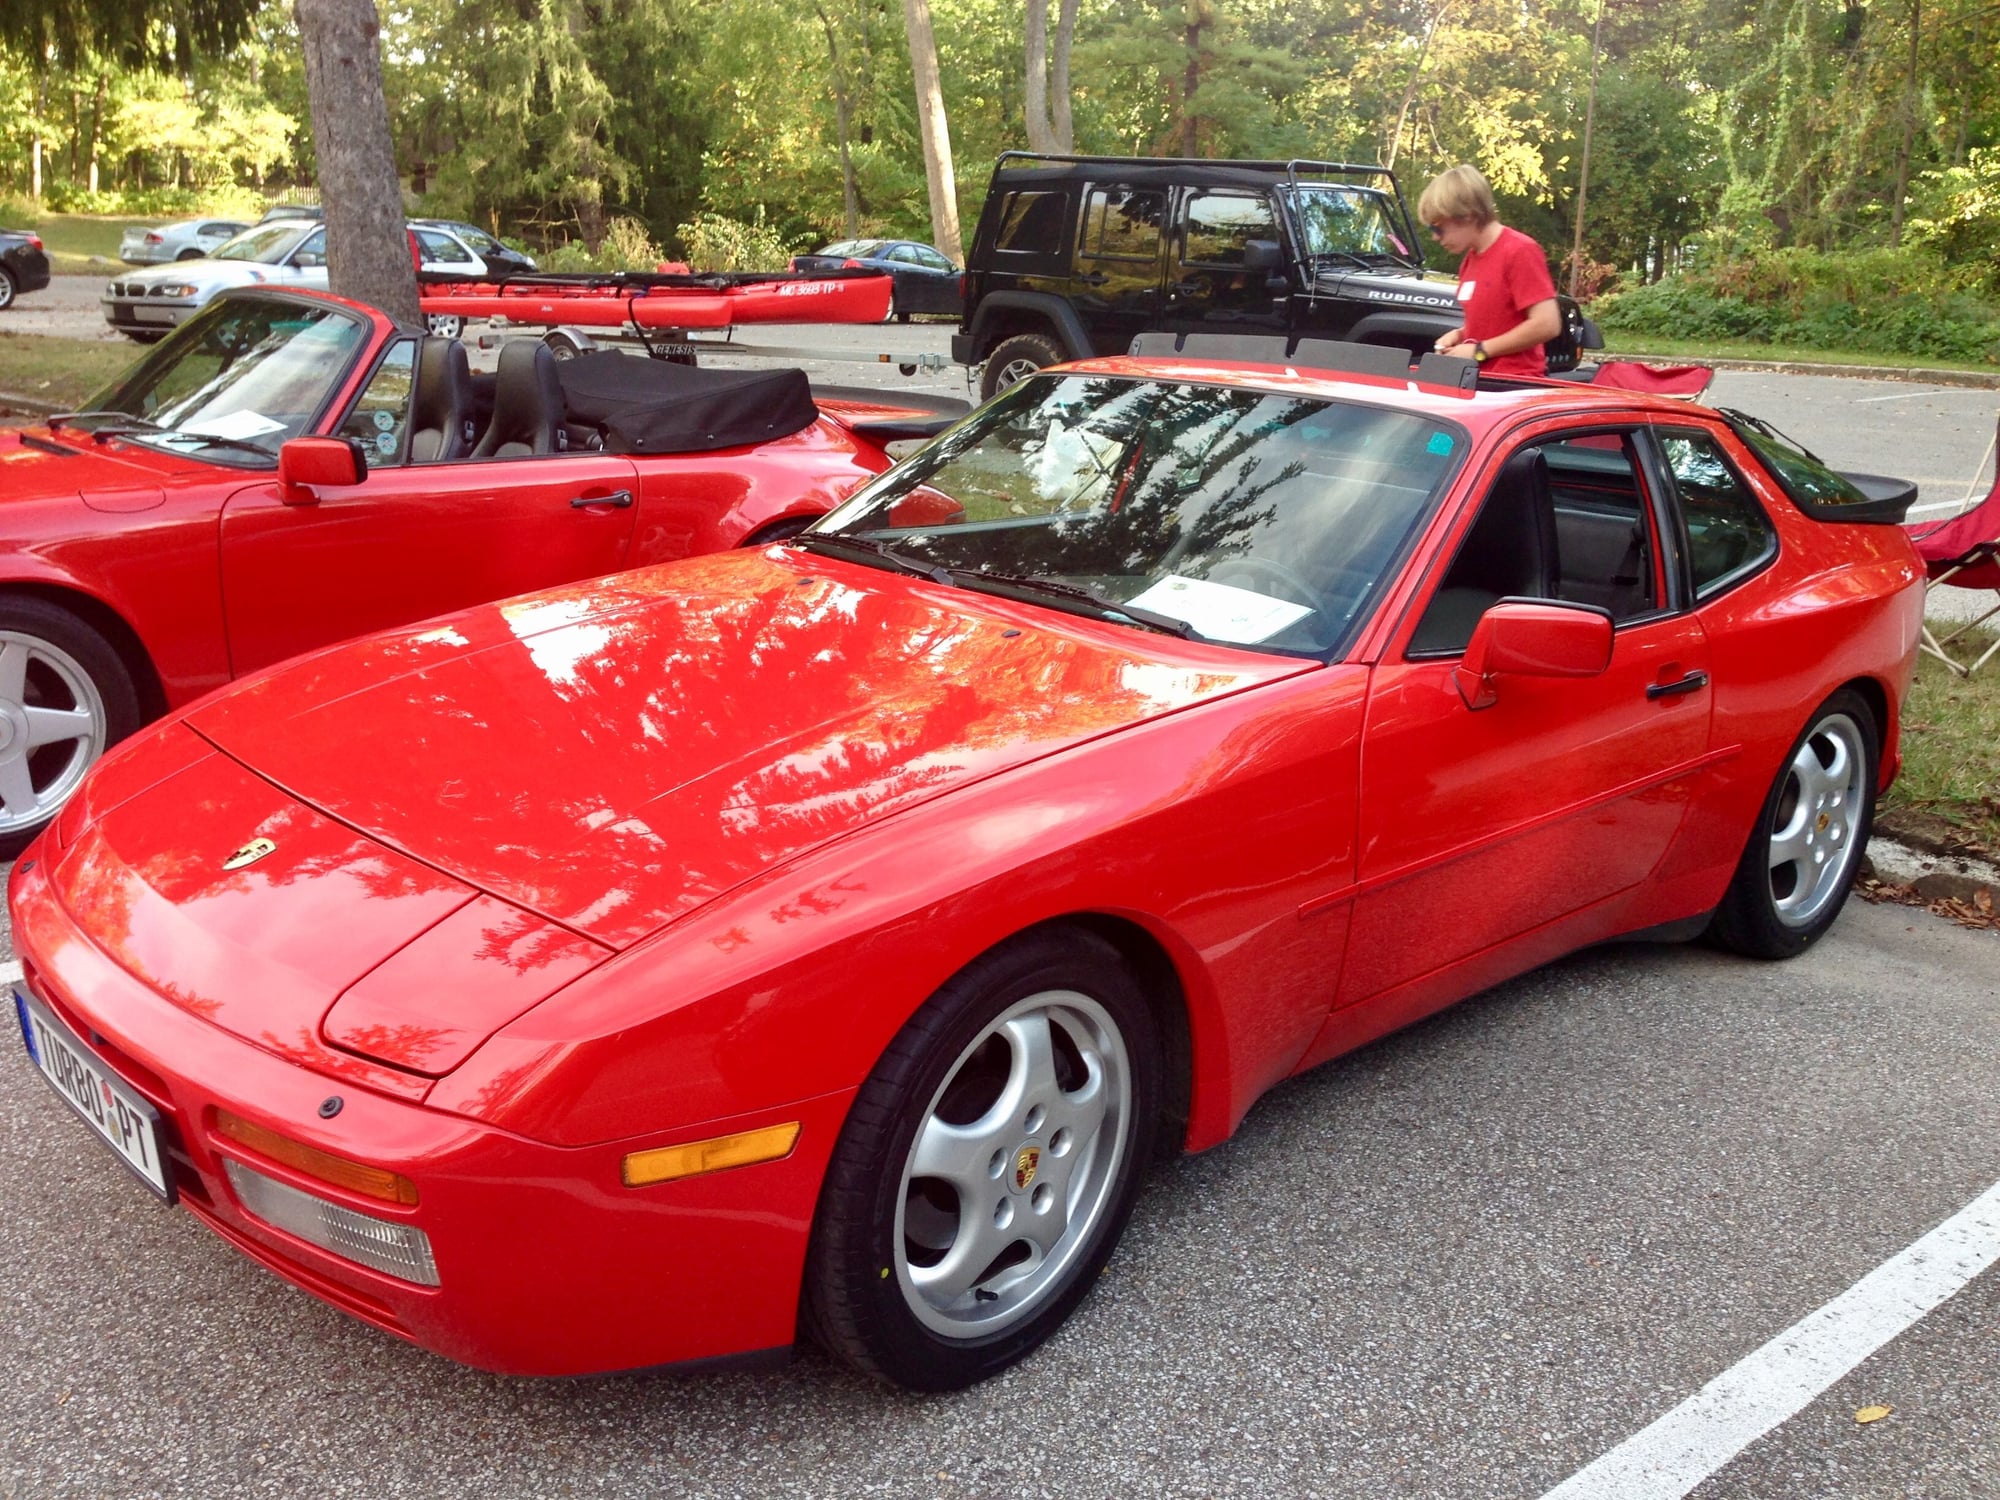 1989 Porsche 944 -  - Used - VIN Guards Red/Black - 4 cyl - Manual - Coupe - Red - Eau Claire, MI 49111, United States